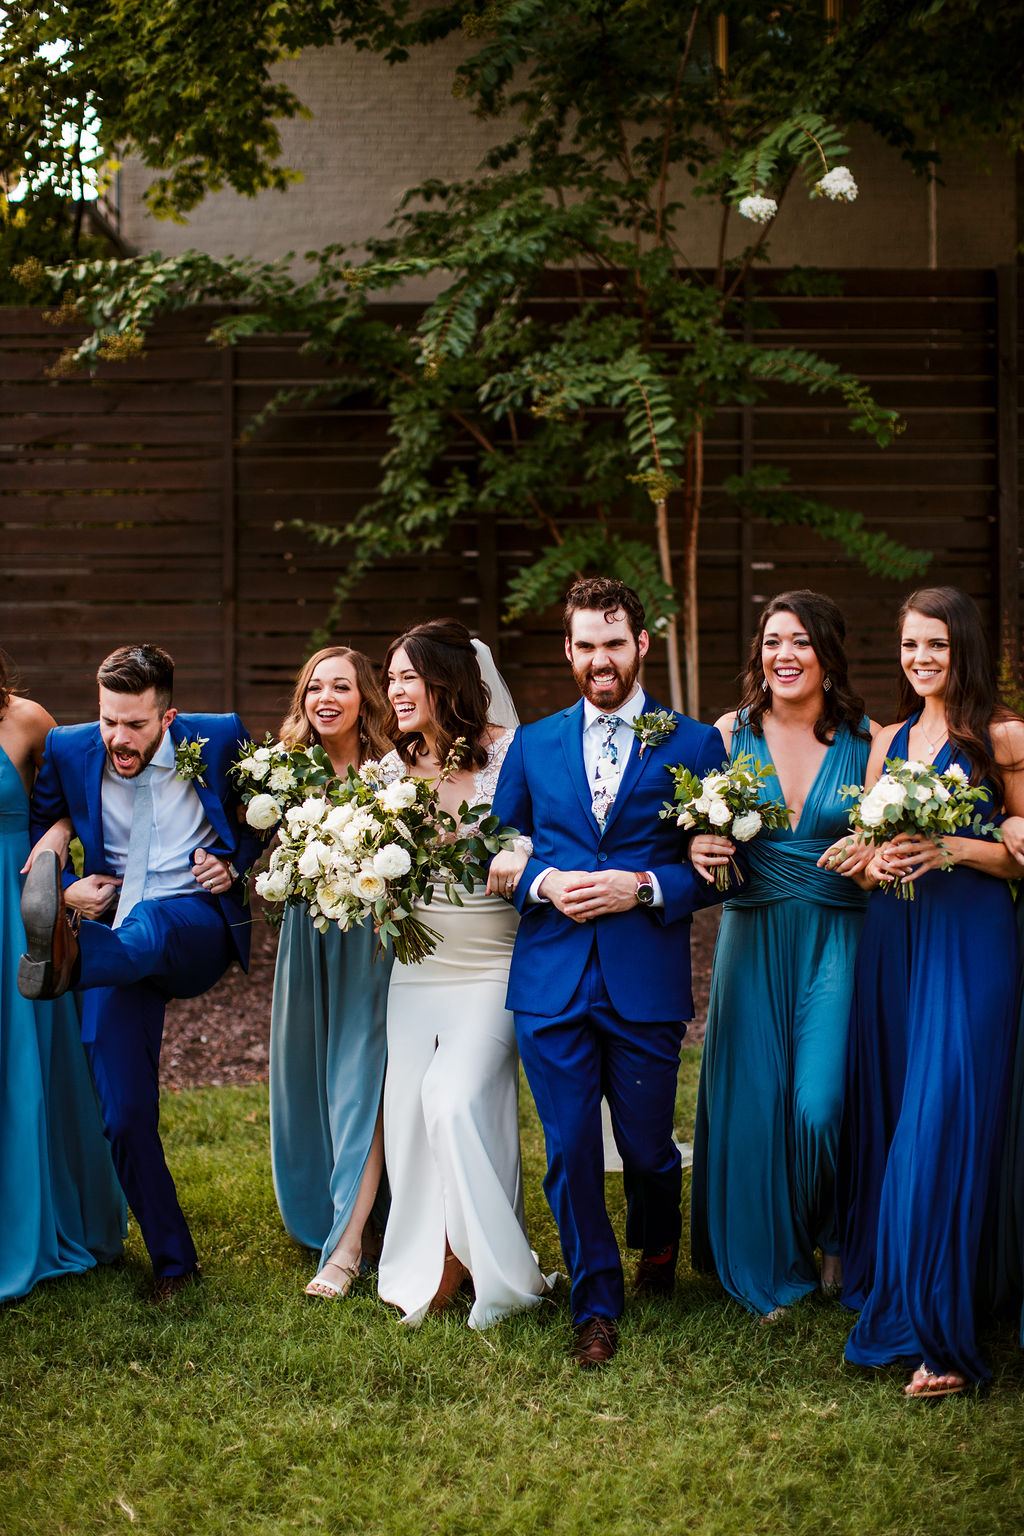 All white and greenery bouquets for bridesmaids in blue dress // Nashville Wedding Flowers